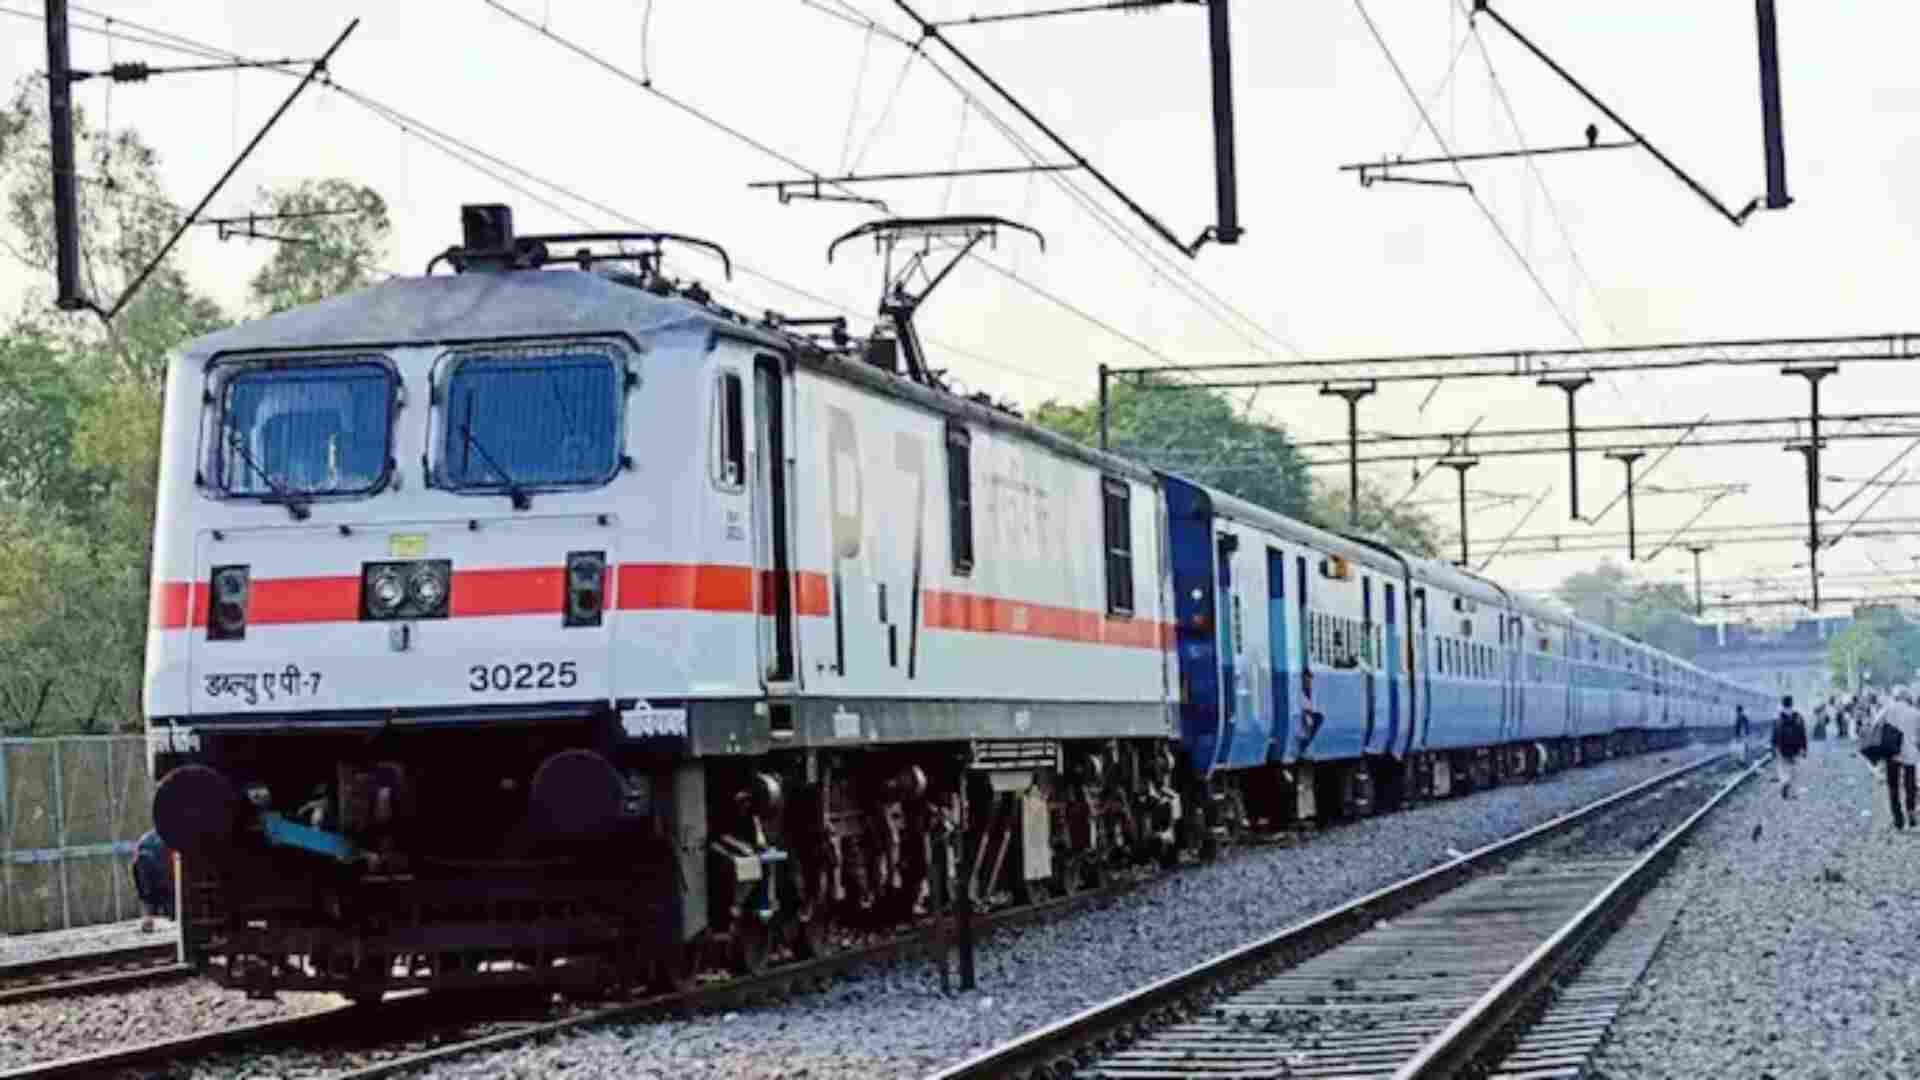 Aspiring Army Officer ‘Thrown Out Of Moving Train’ In Ludhiana